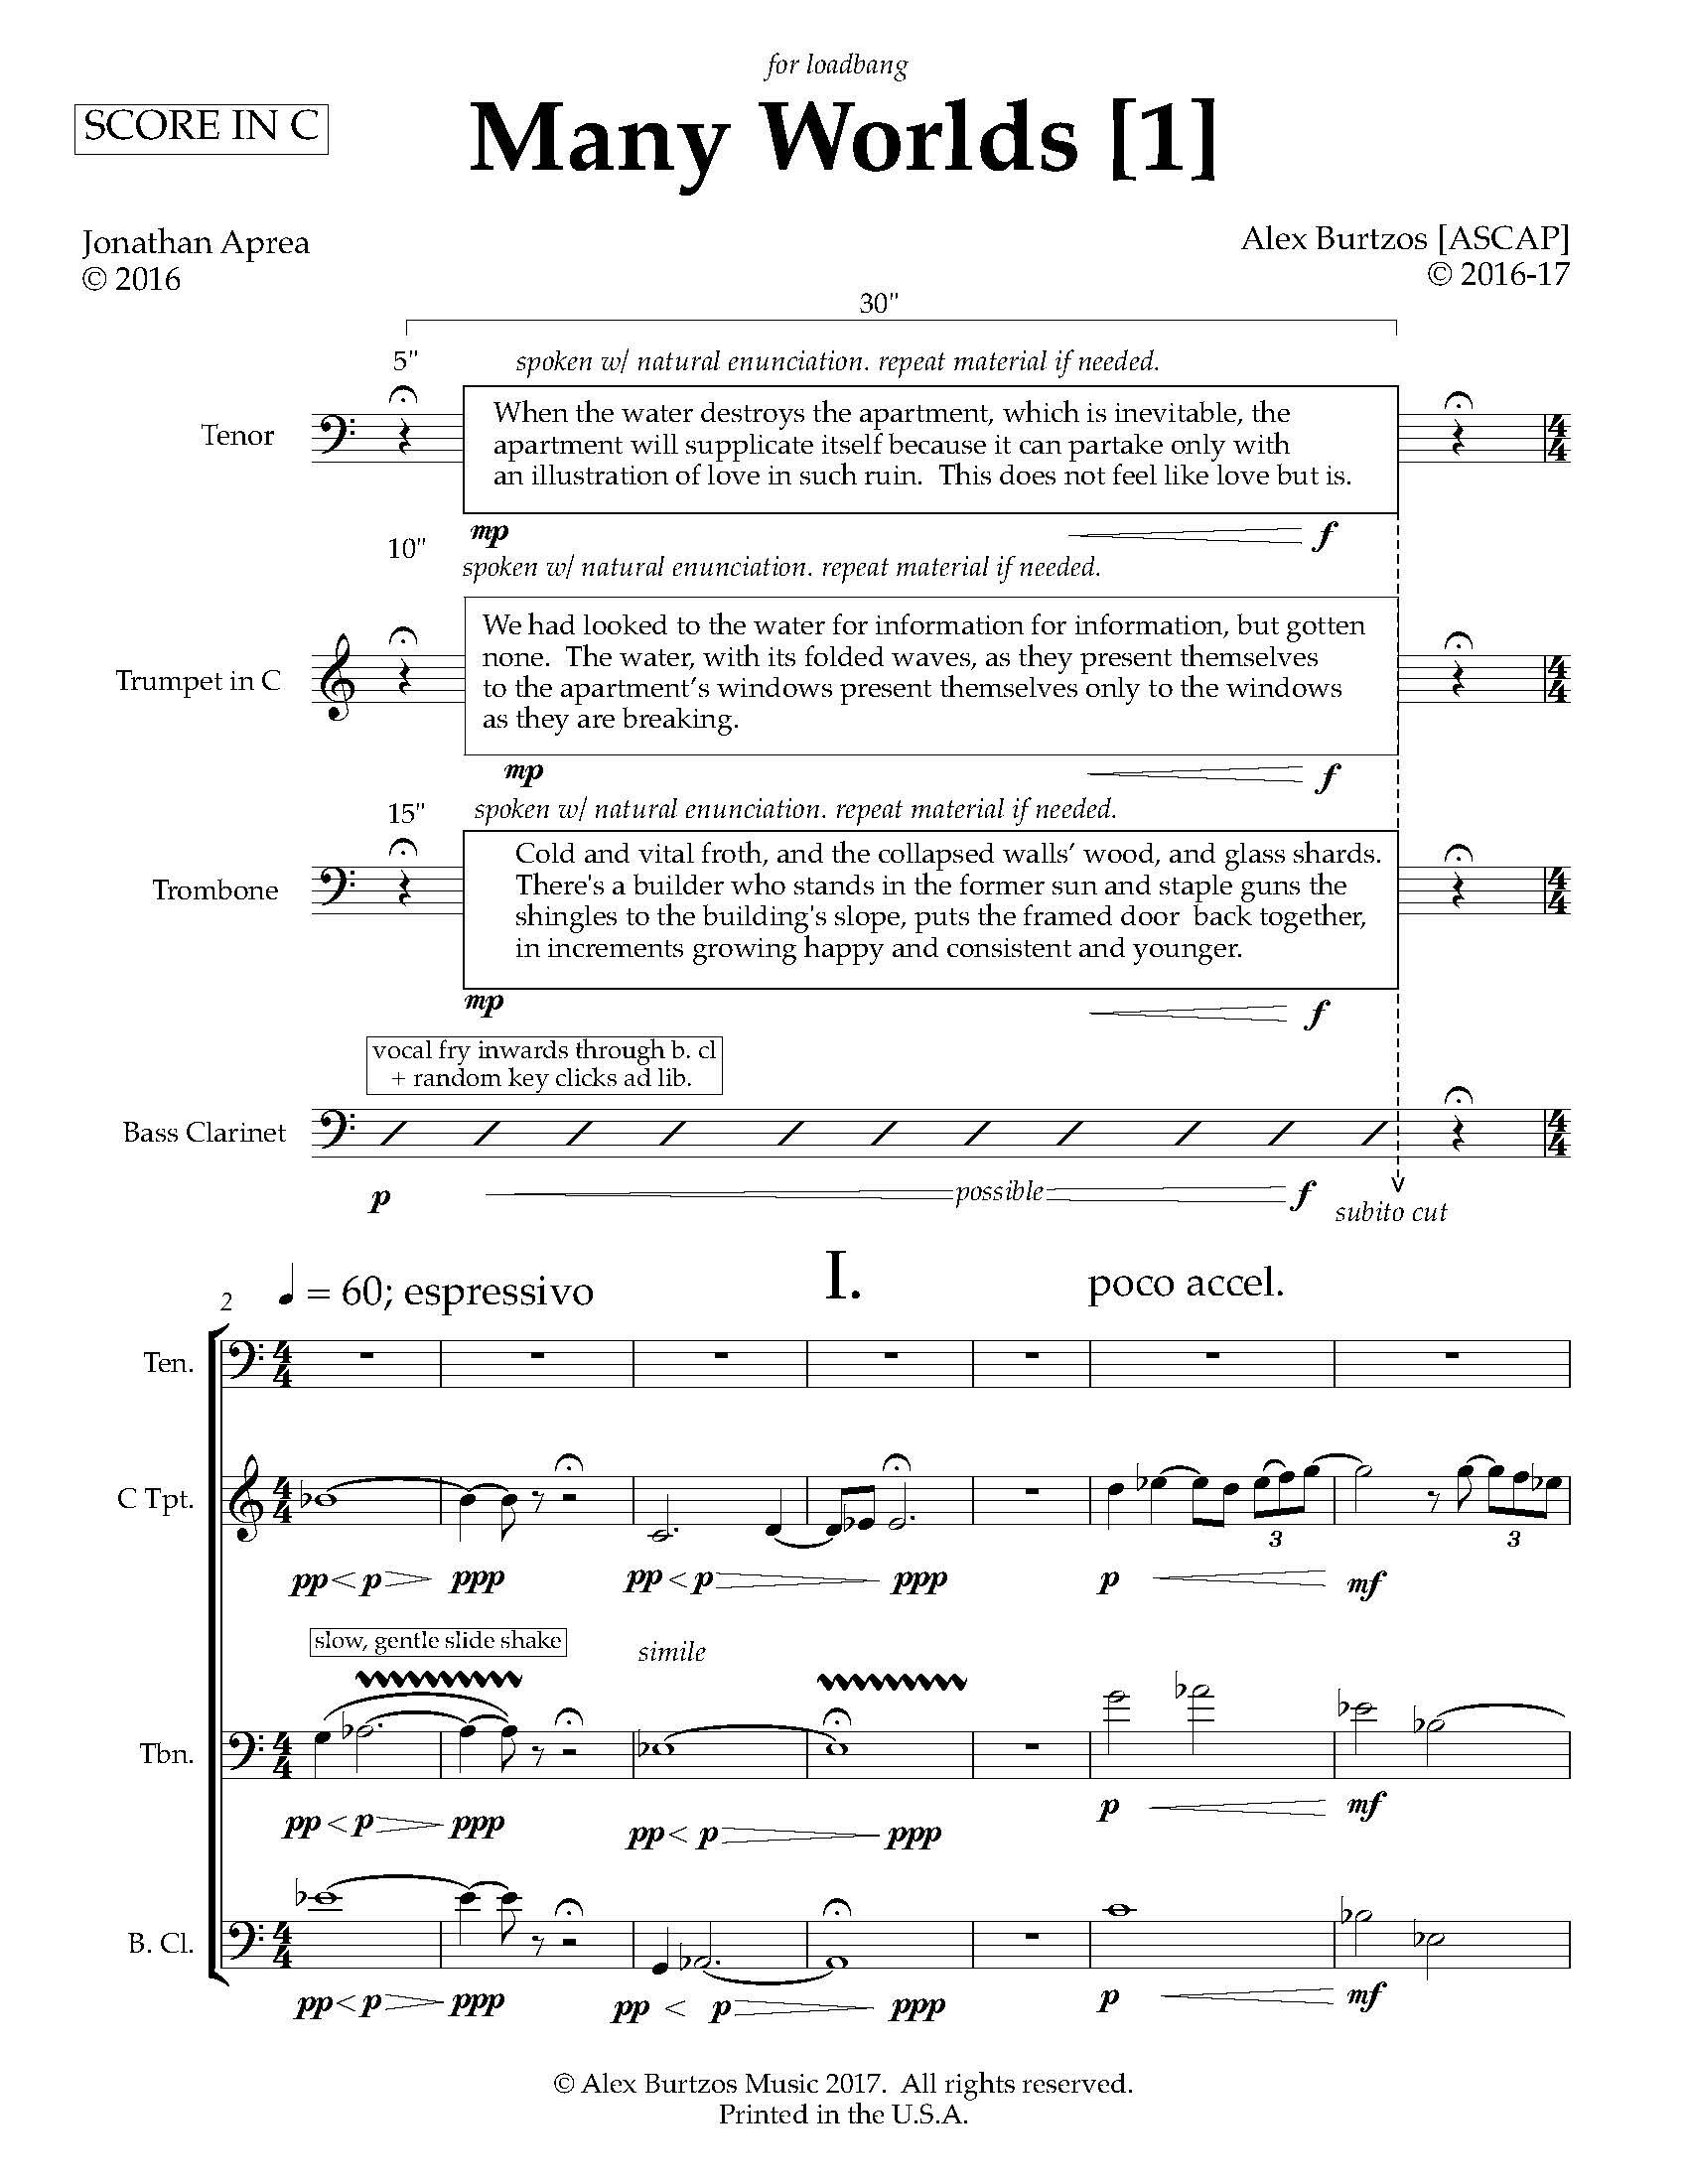 Many Worlds [1] - Complete Score_Page_10.jpg